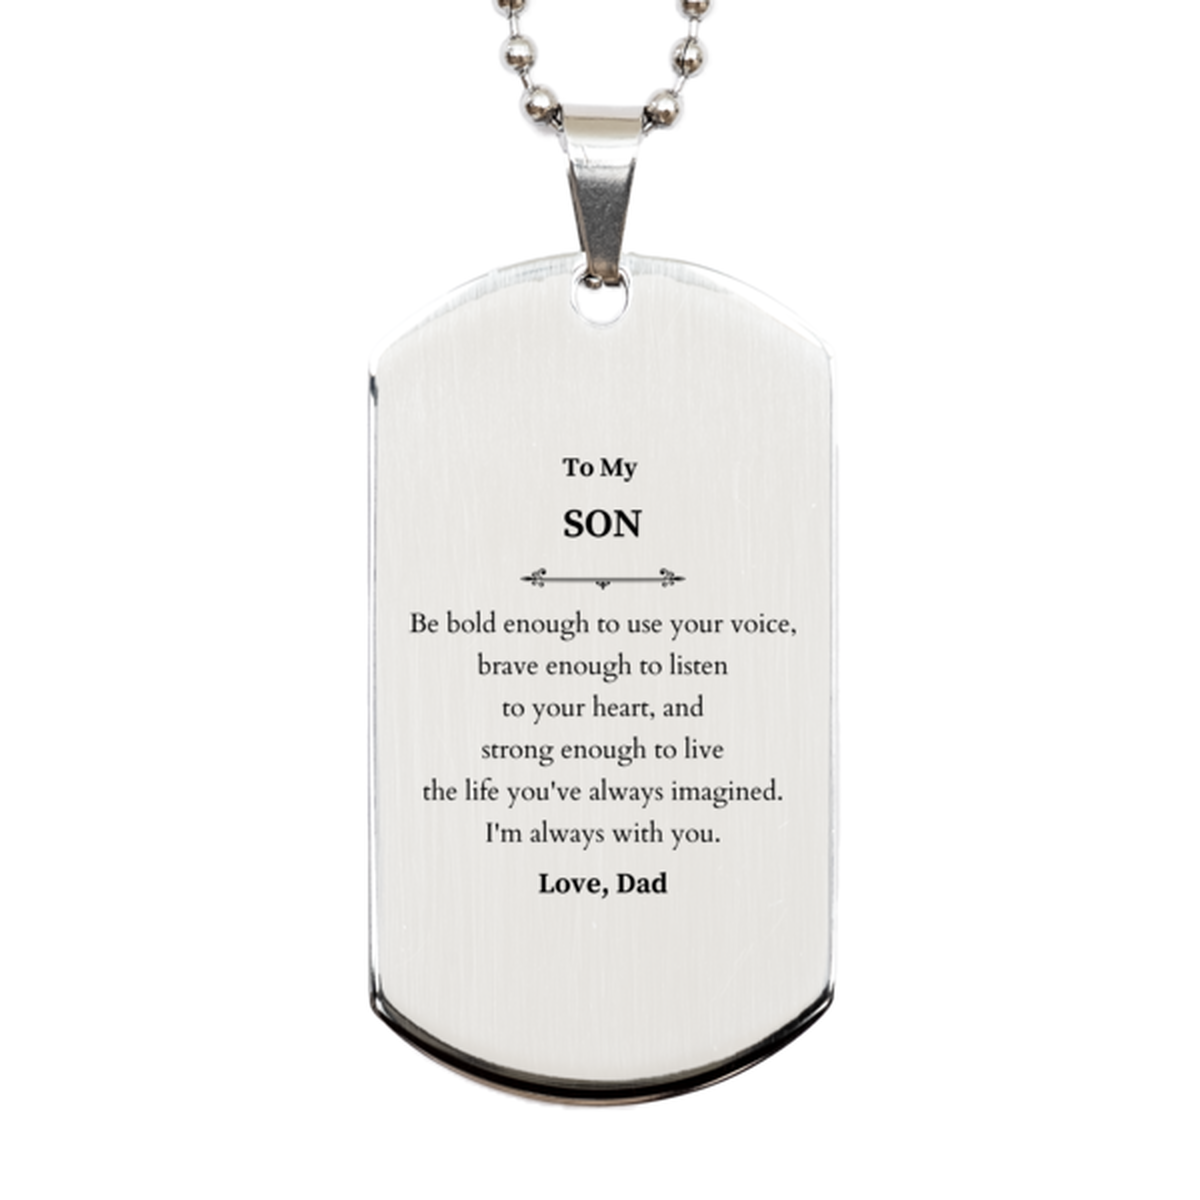 Keepsake Son Silver Dog Tag Gift Idea Graduation Christmas Birthday Son from Dad, Son Be bold enough to use your voice, brave enough to listen to your heart. Love, Dad